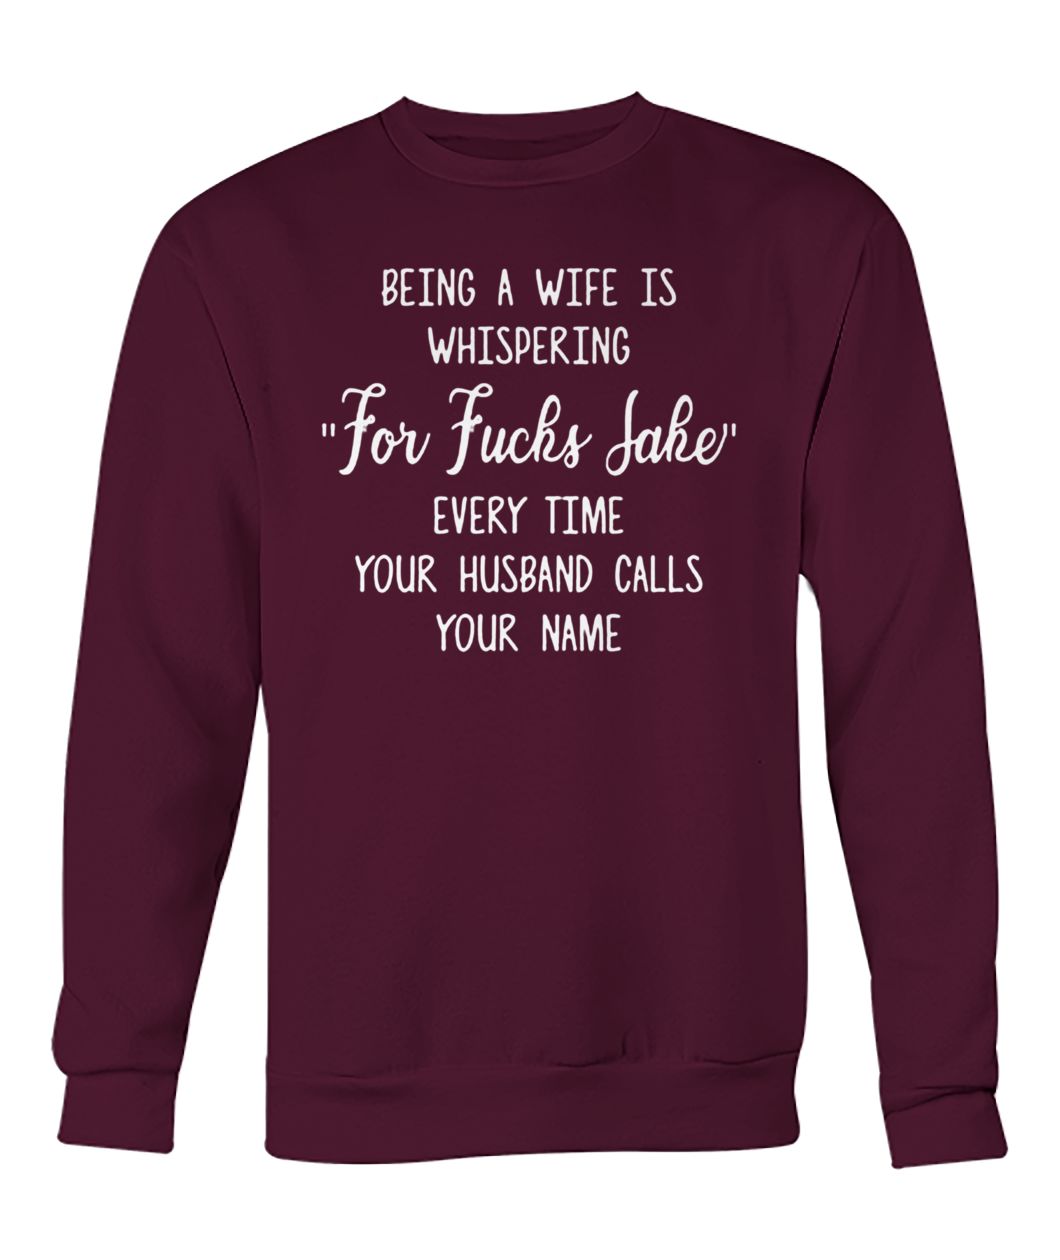 Being a wife is whispering for fuck sake crew neck sweatshirt